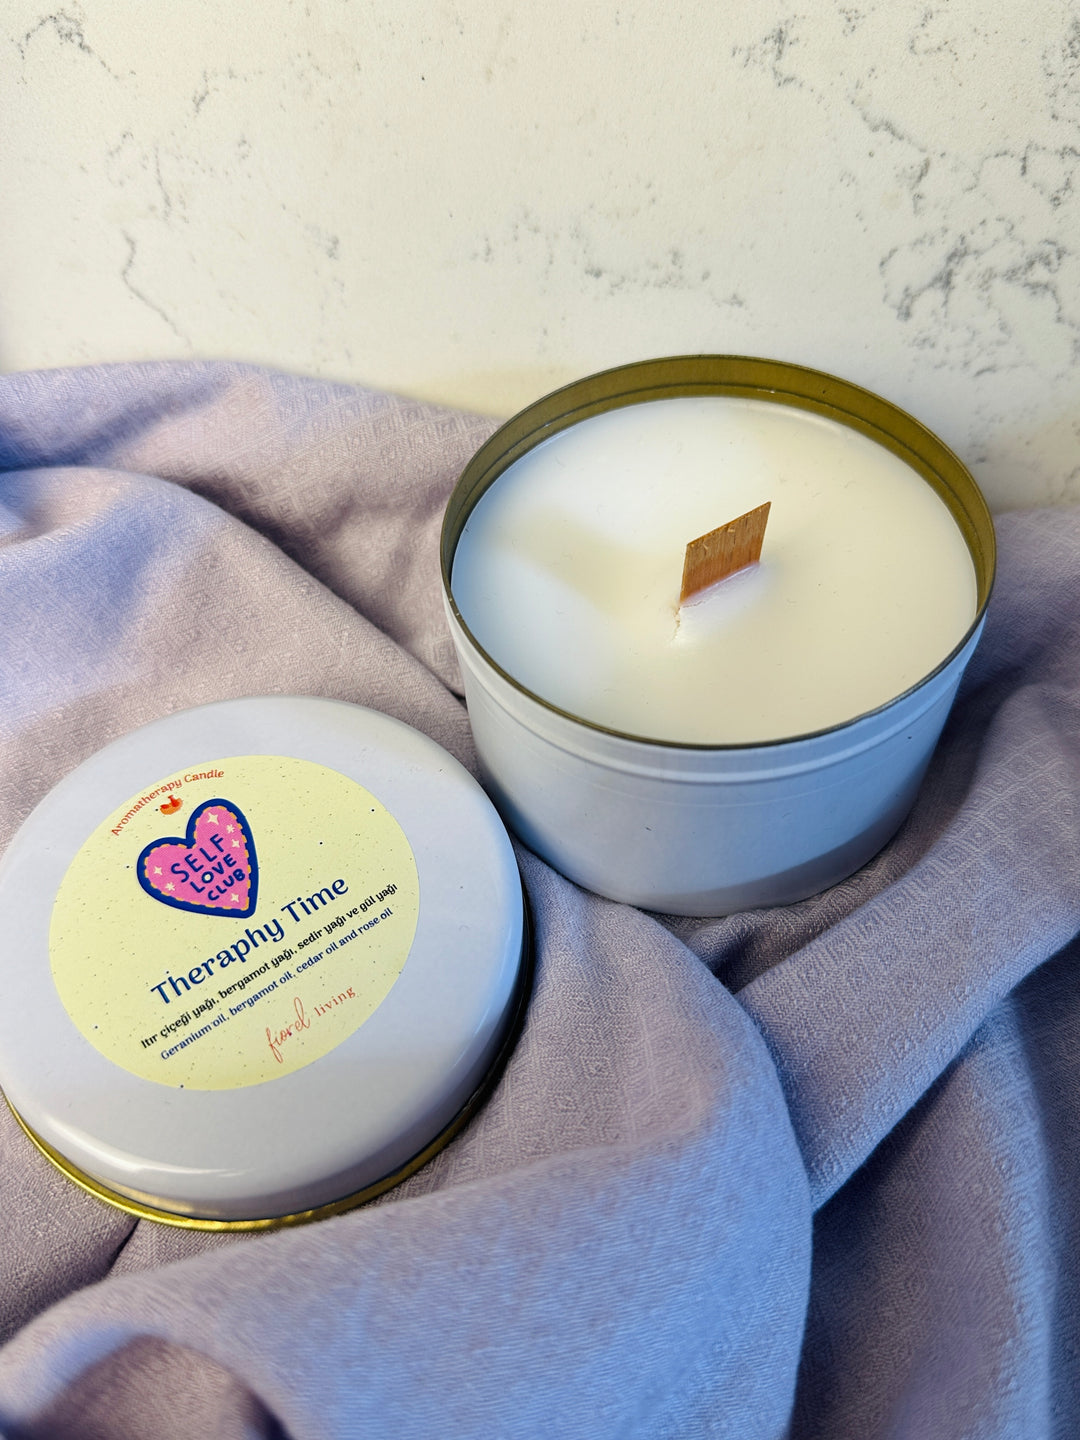 Aromatherapy Candle | Therapy Time